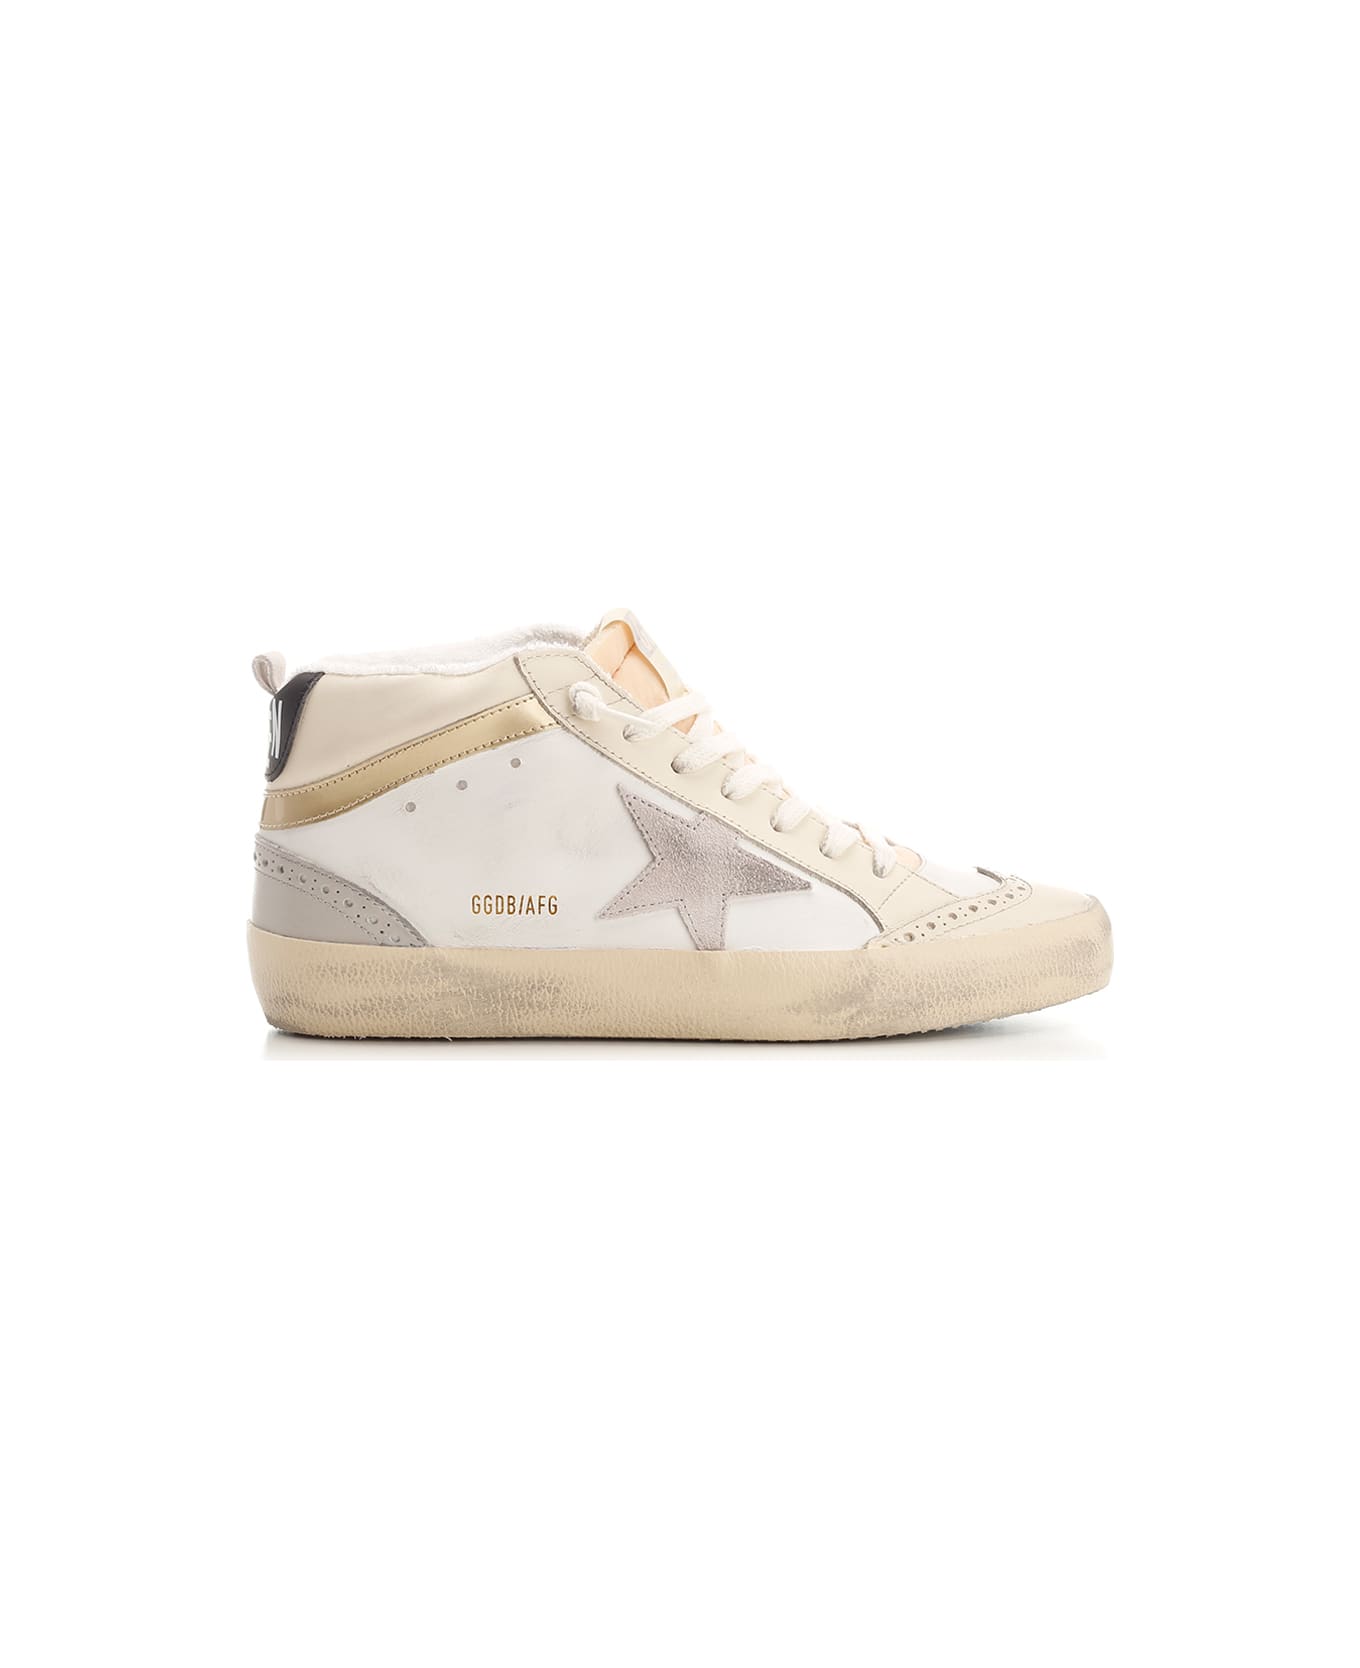 Golden Goose Mid Star Sneakers - White/Lilac/Grey/Gold